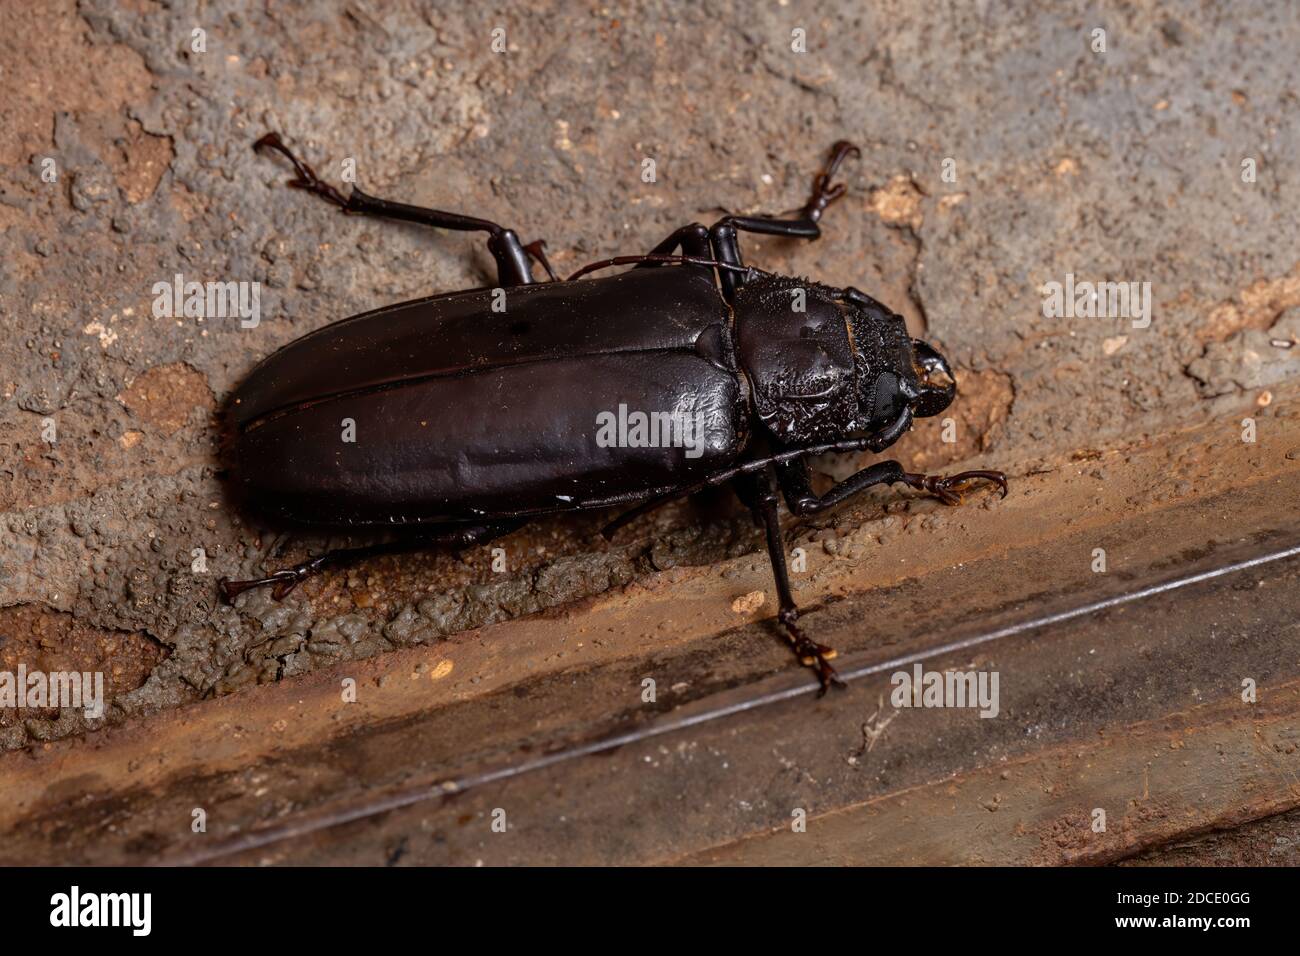 Brazilian Prionid Beetle of the species Mallodon spinibarbis Stock Photo